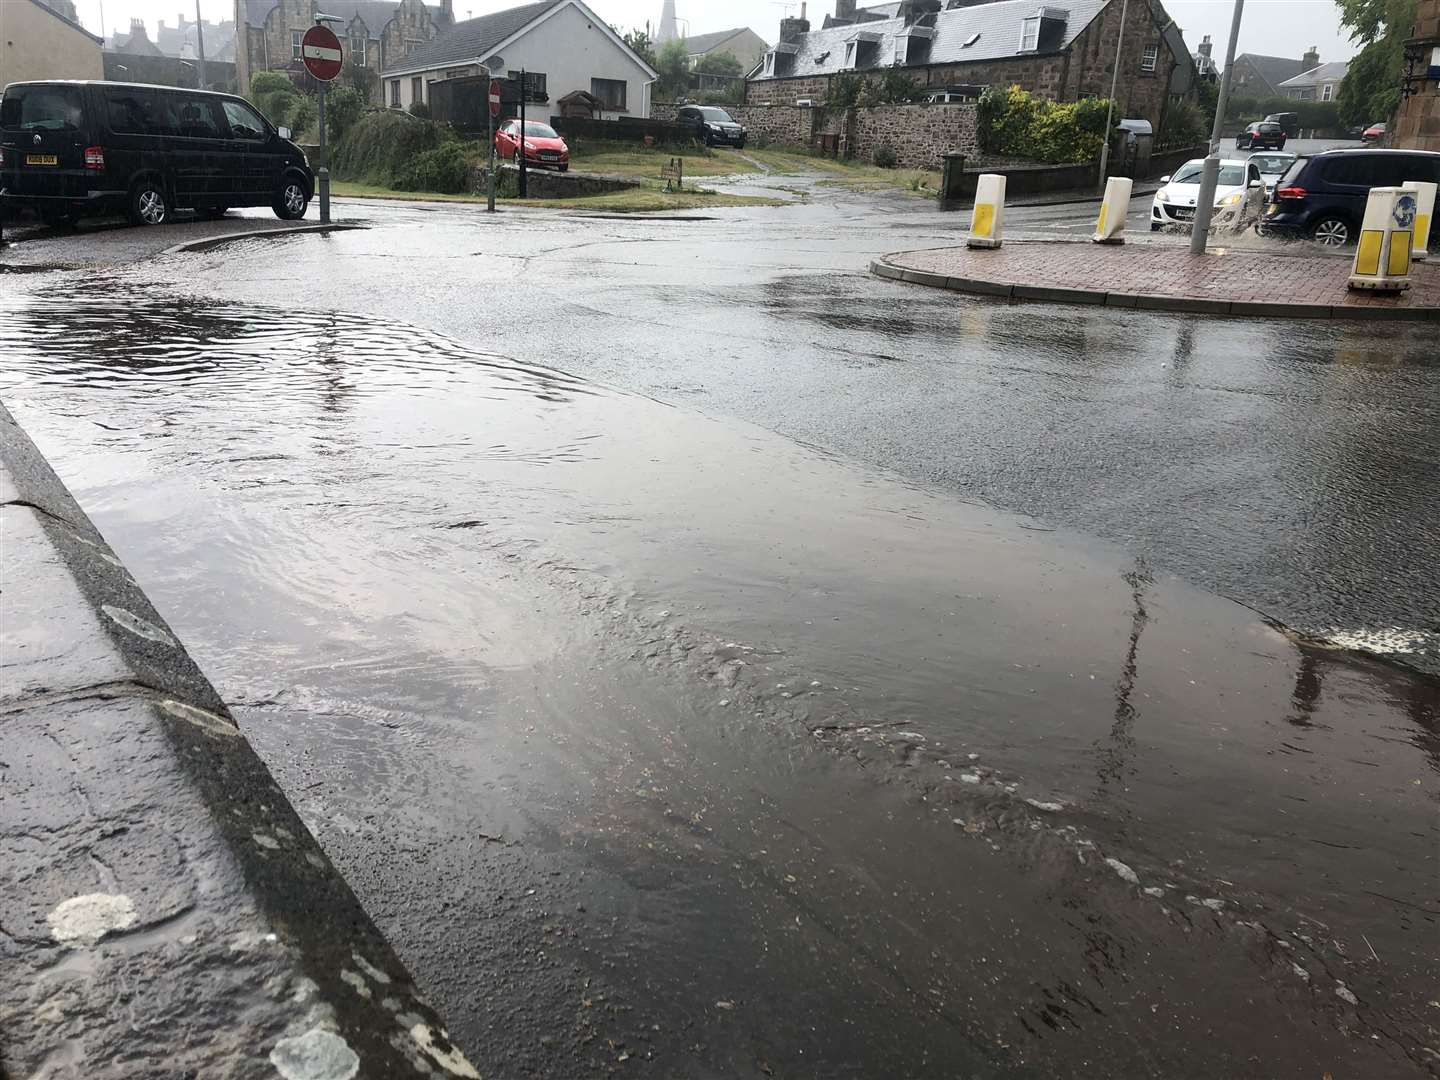 Flooding at the roundabout.